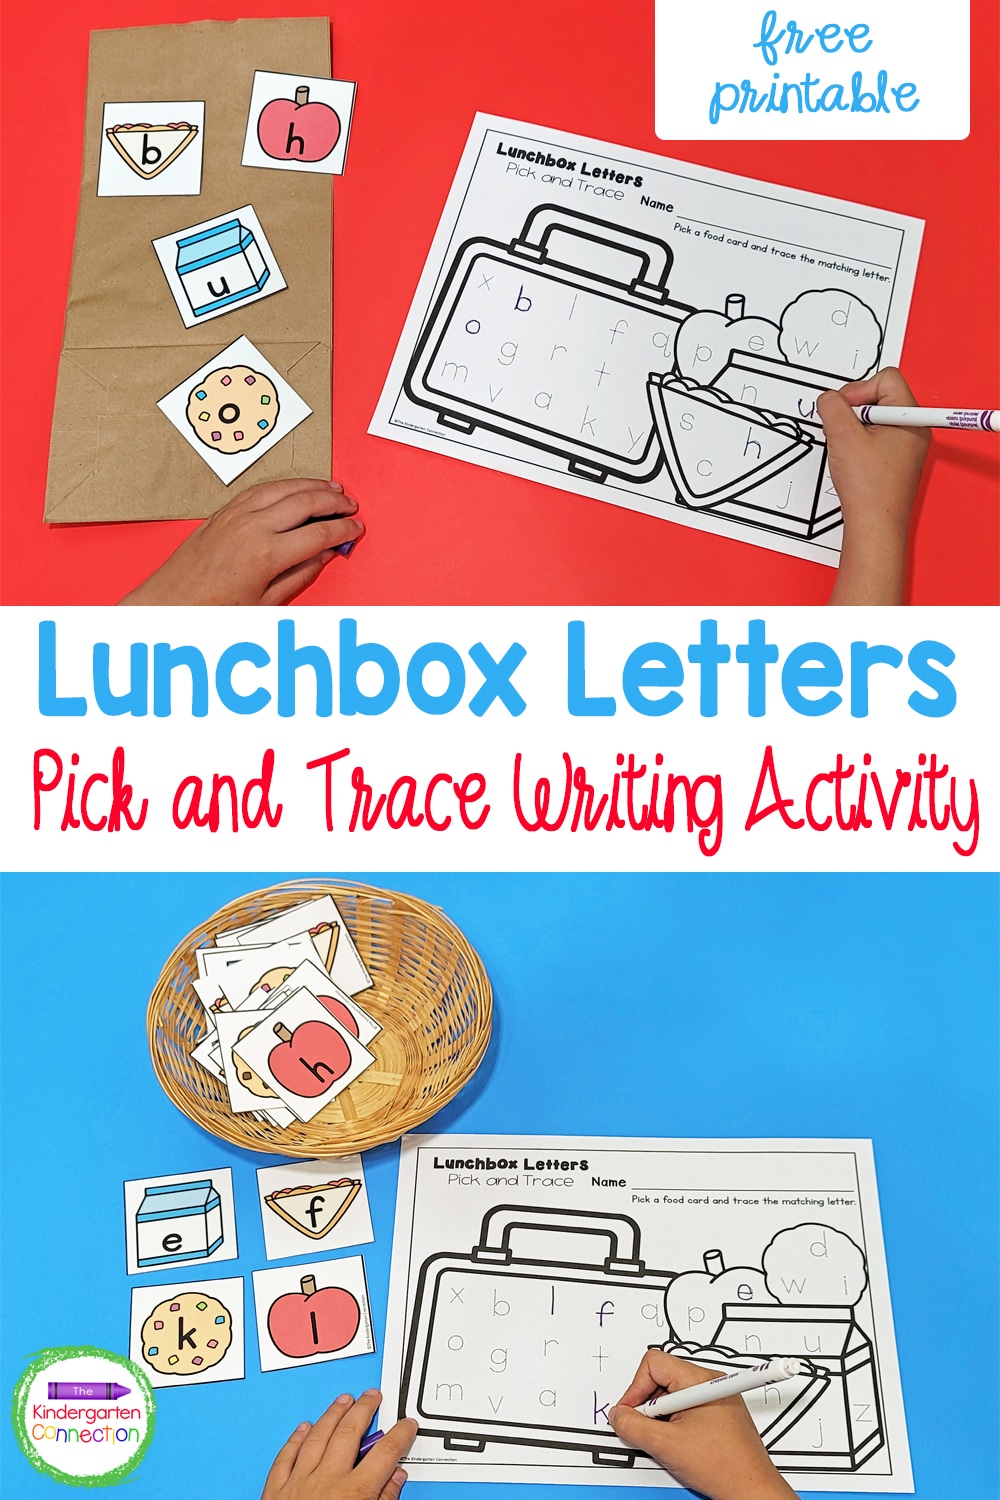 Lunchbox Pick and Trace Letter Writing Activity